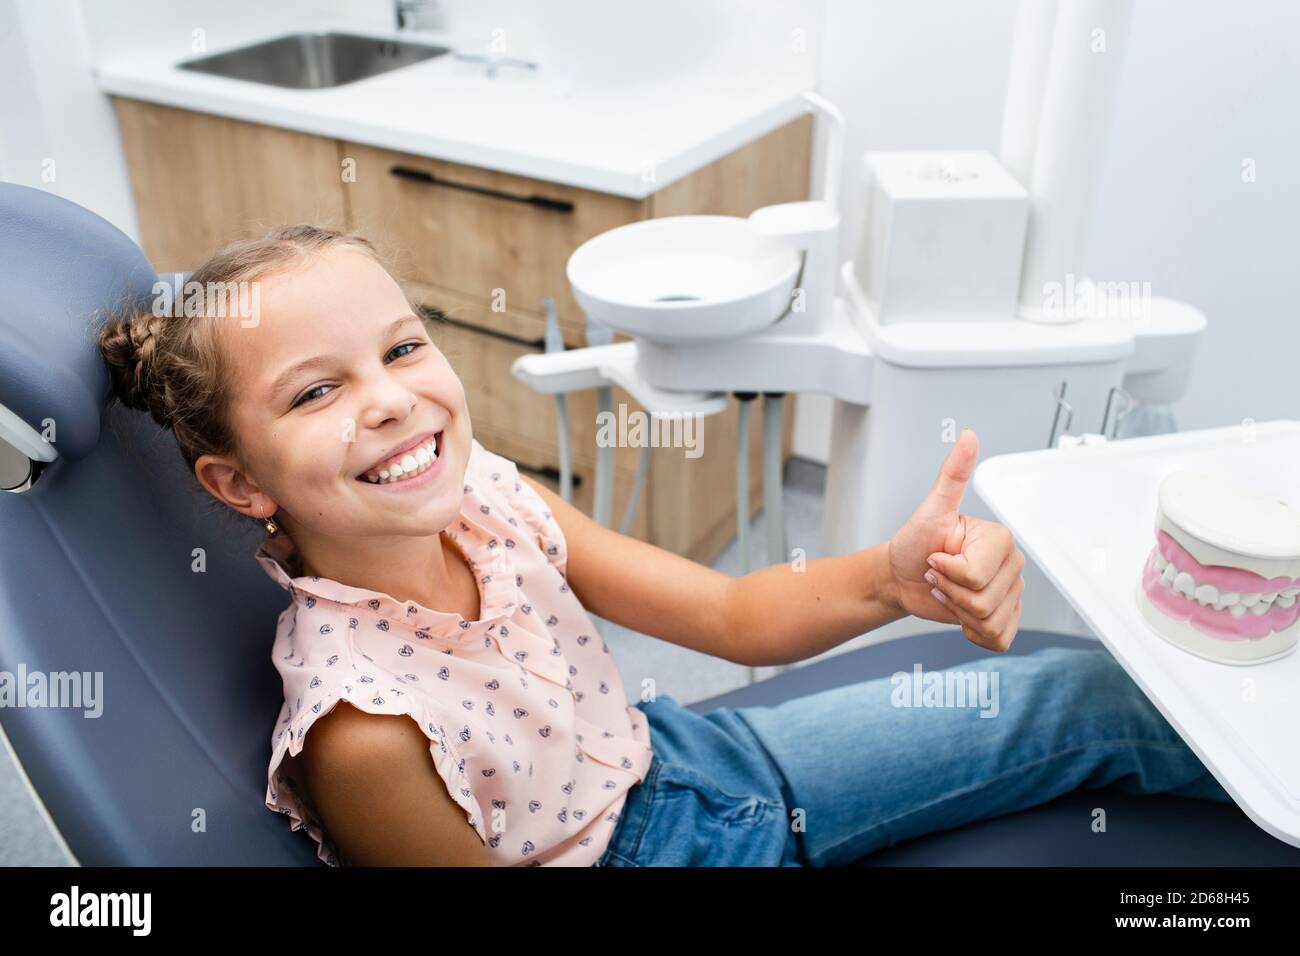 Very happy smiling girl sitting on a dental chair and showing thumbs up. Stock Photo